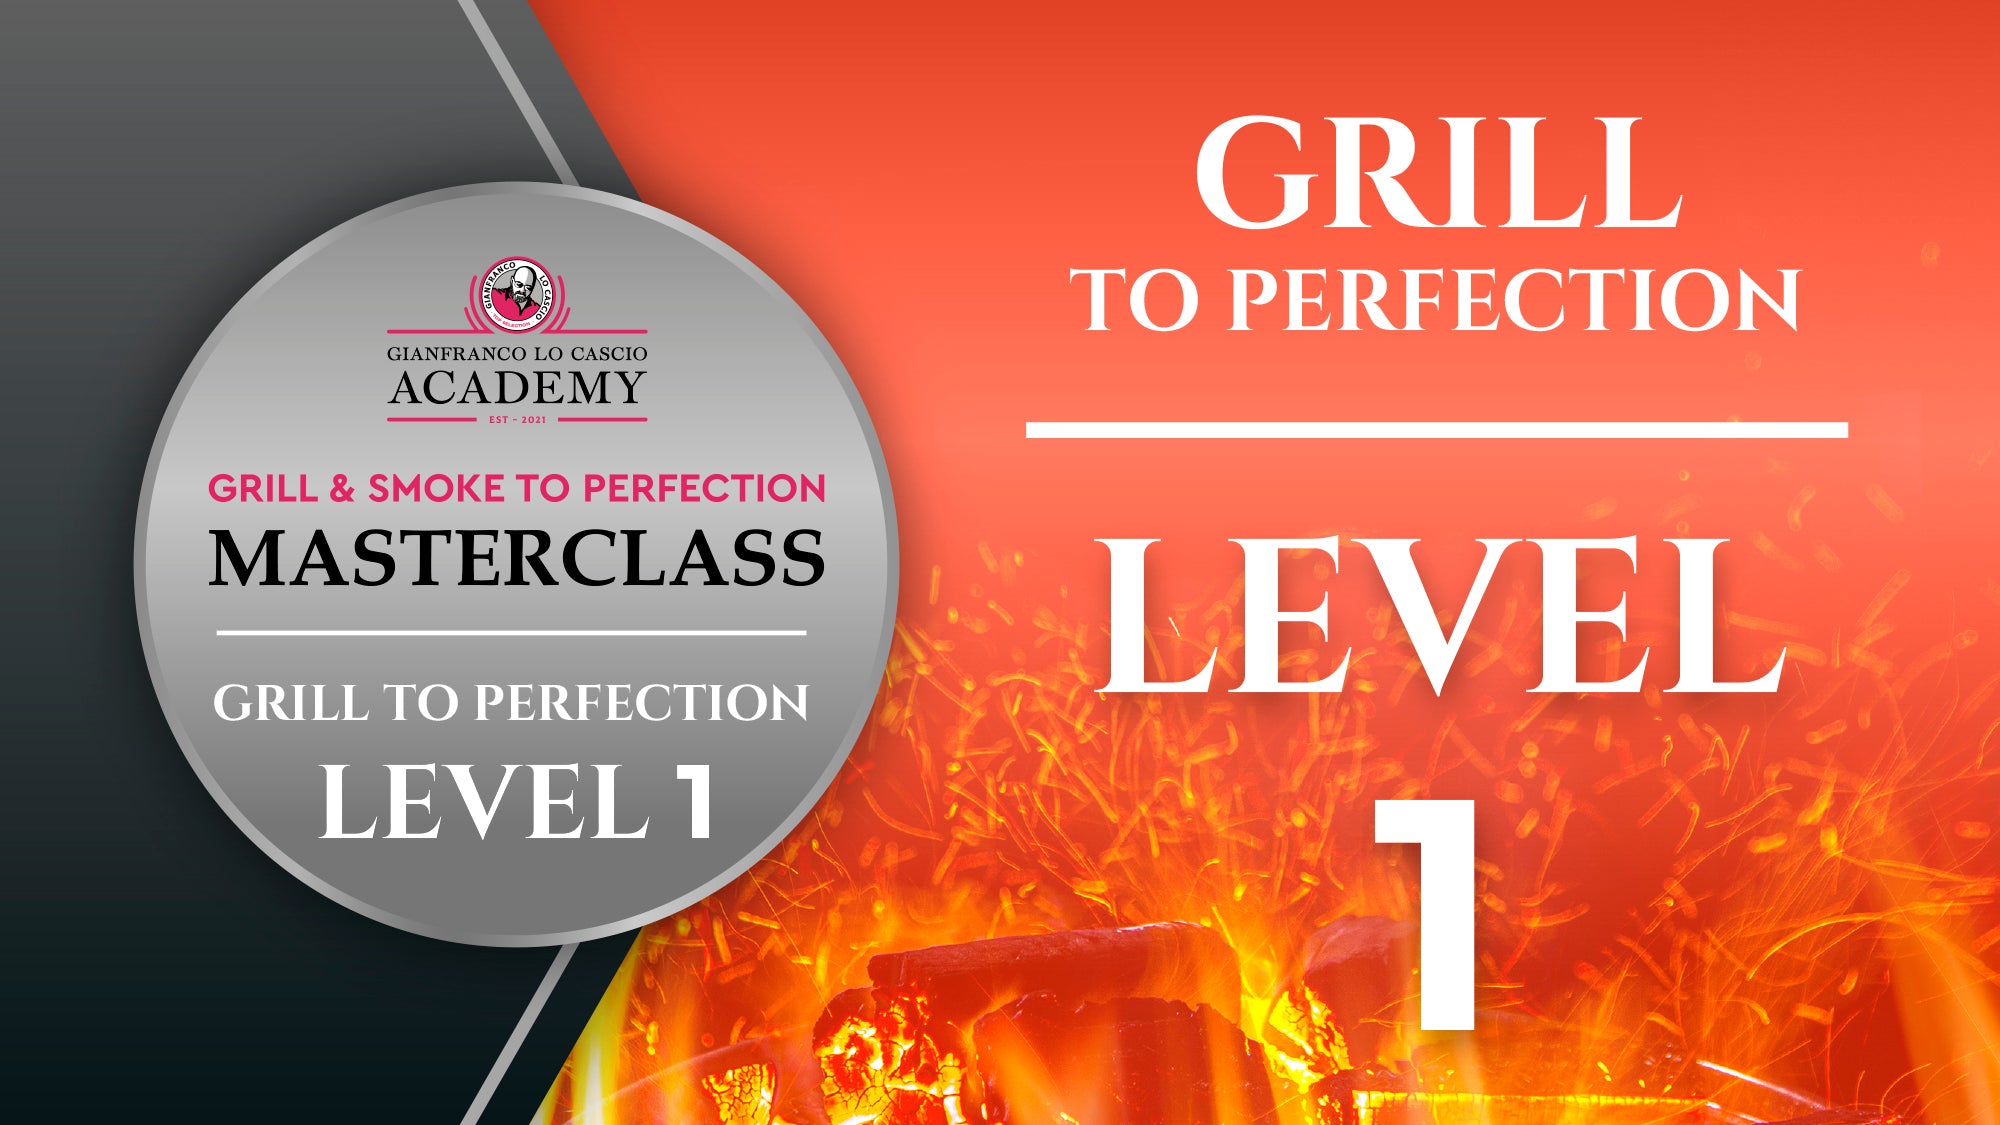 Grill to Perfection - Level 1 - Video Masterclass GLC Academy